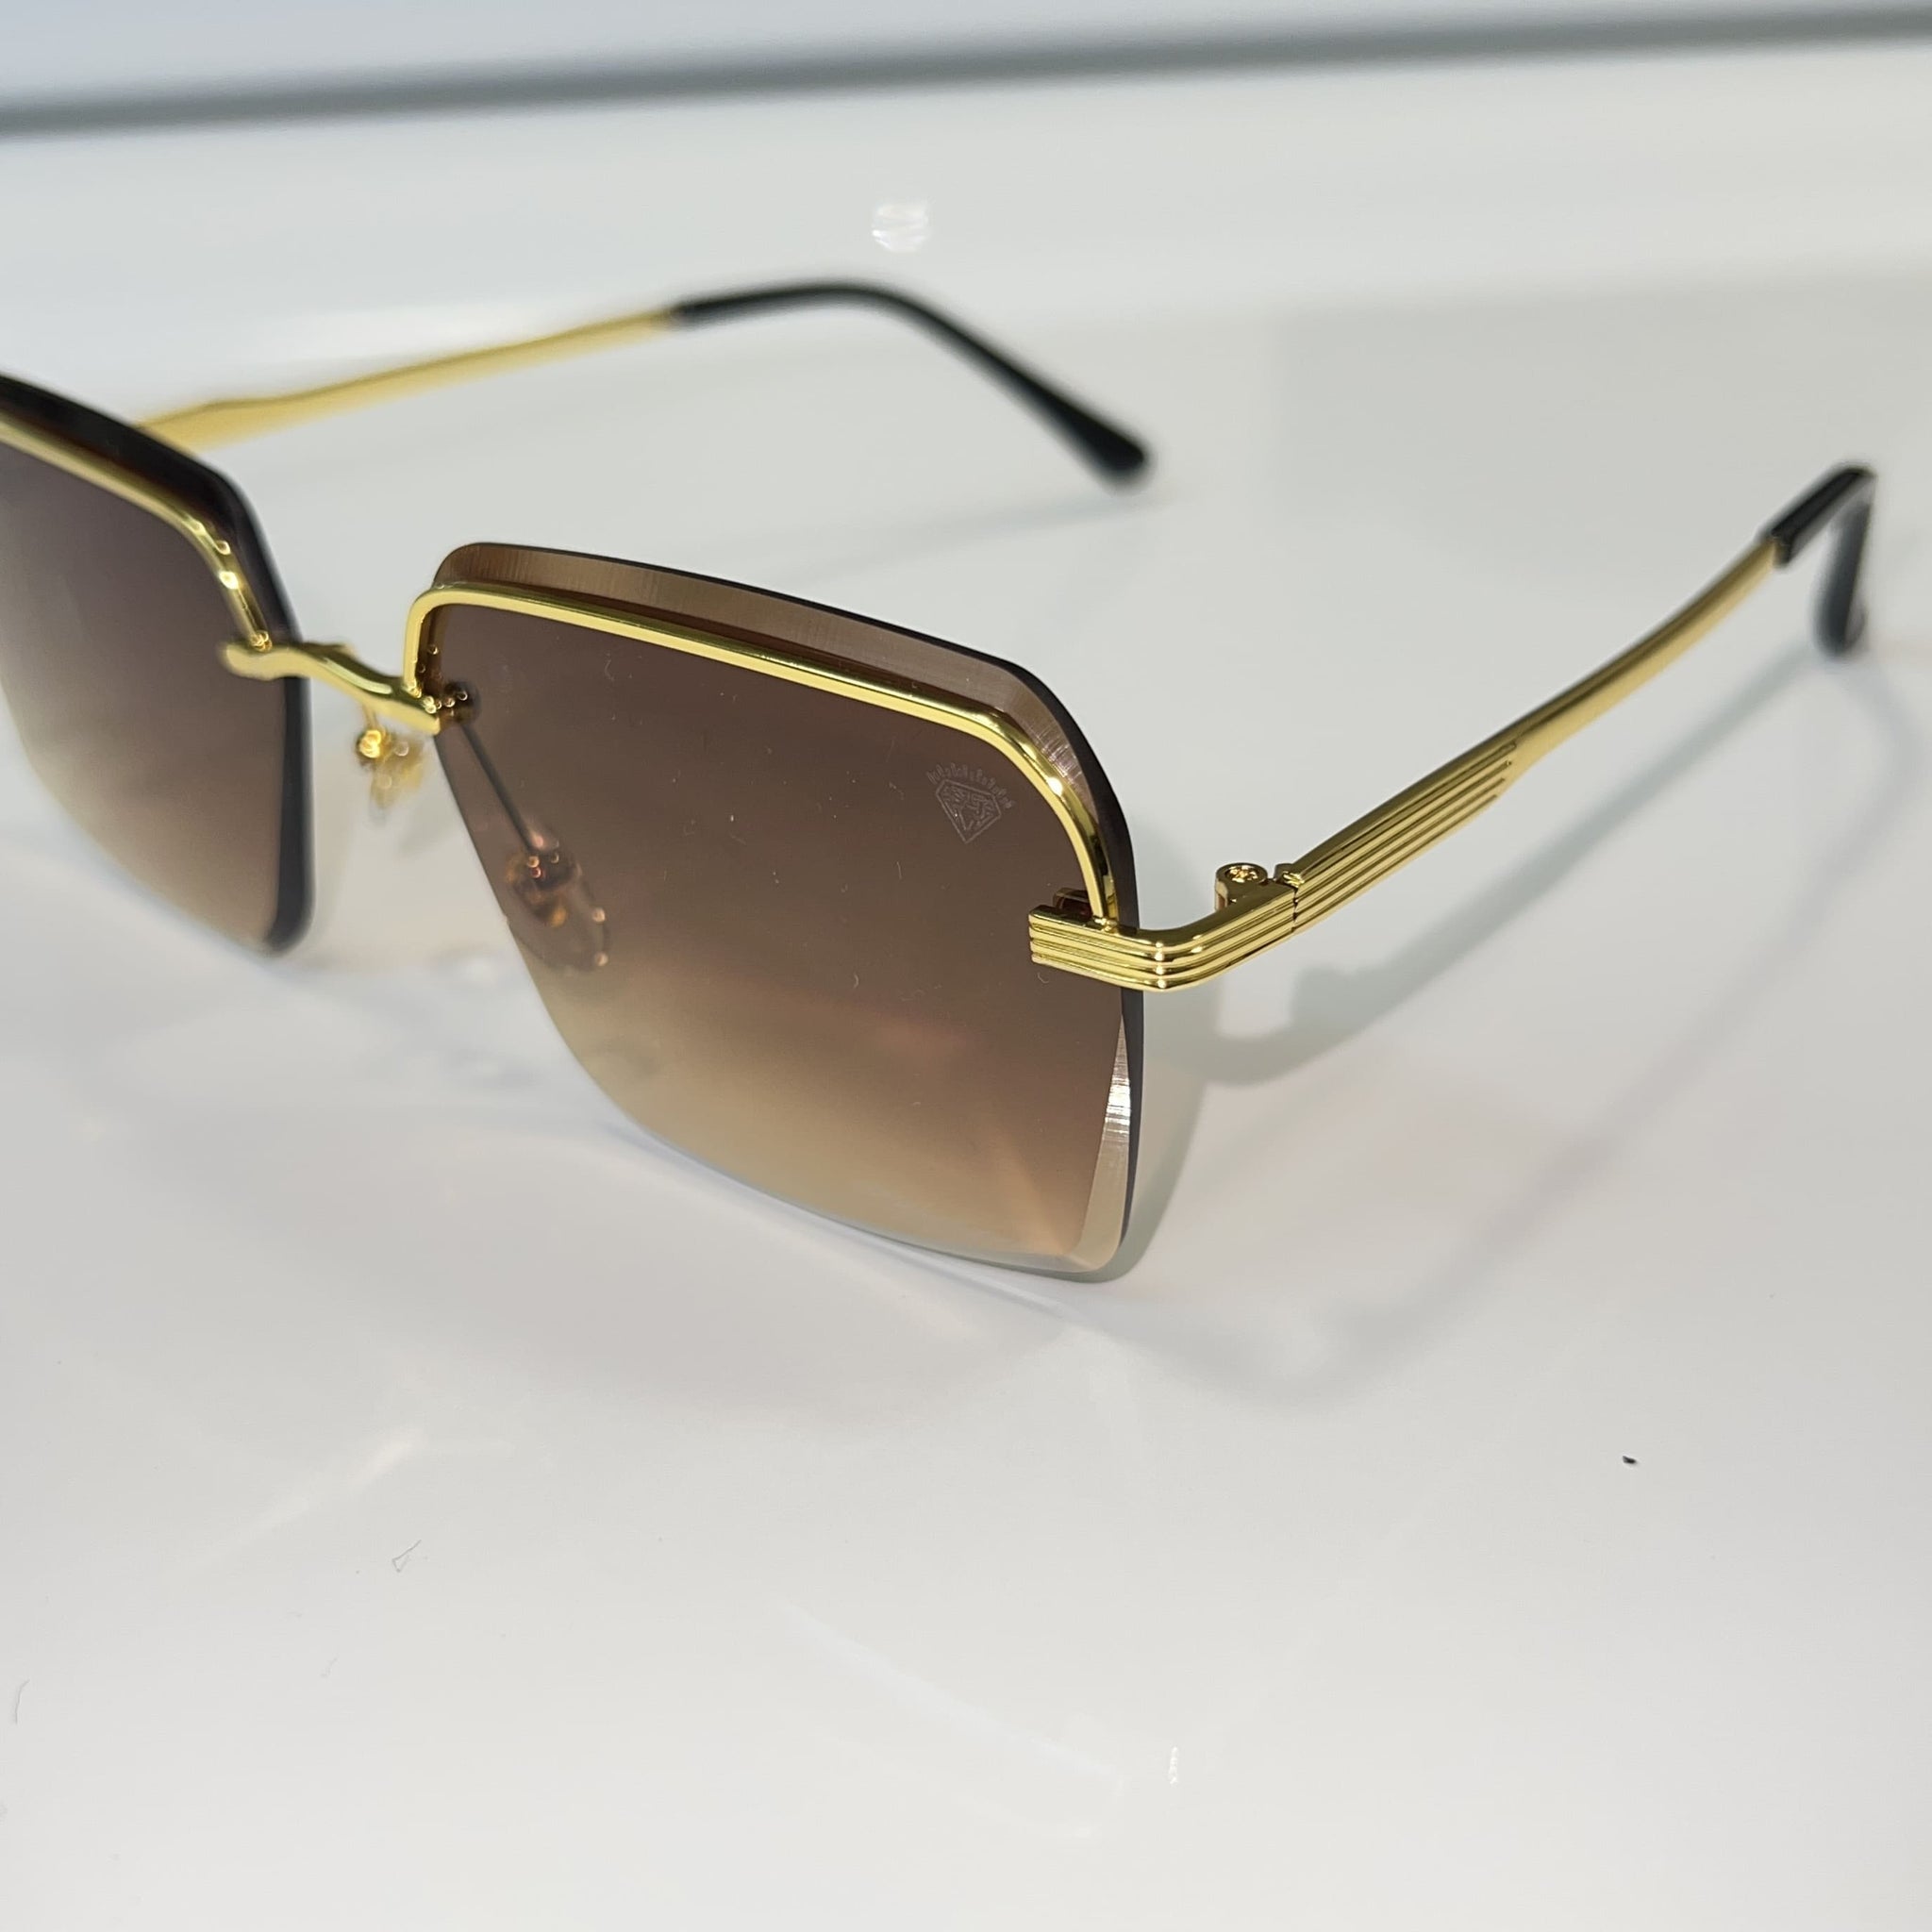 Invincible Glasses - 14k gold plated - Brown Shade - Sehgal Glasses